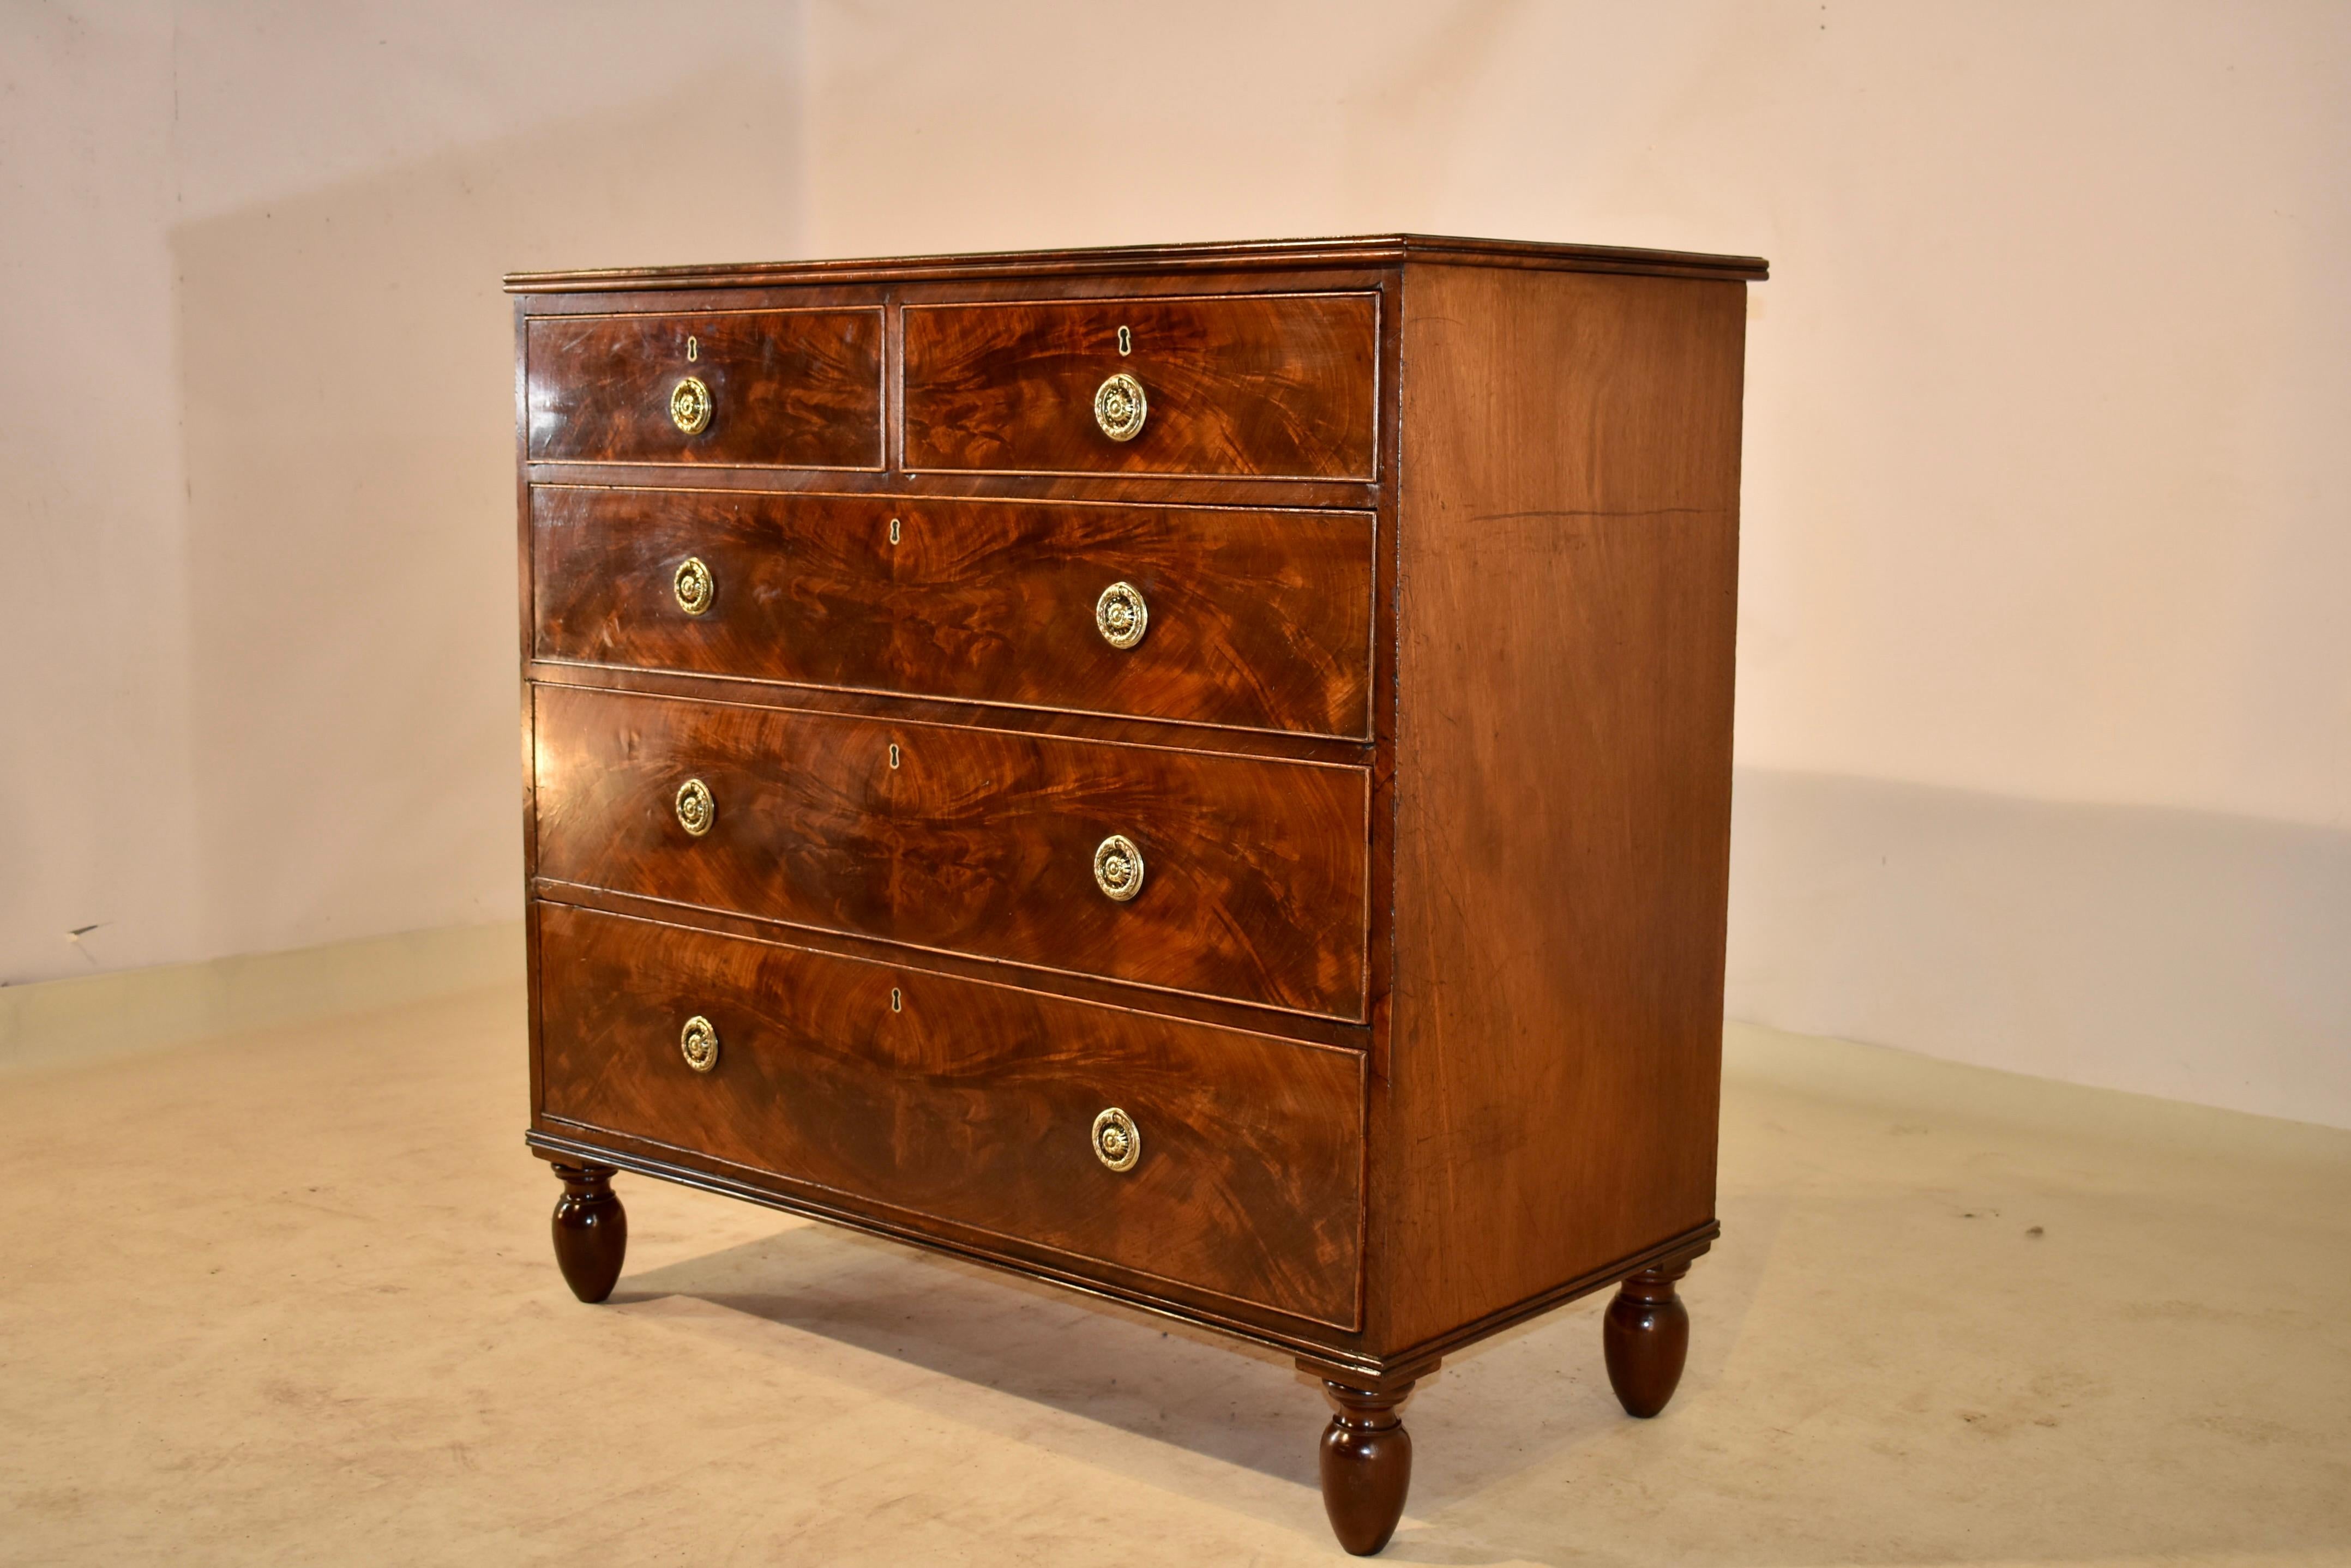 Early 19th century mahogany chest of drawers from England with a wonderfully grained and richly patinated top with a reeded edge, following down to simple well-grained sides and two drawers over three drawers in the front. The drawer fronts are all